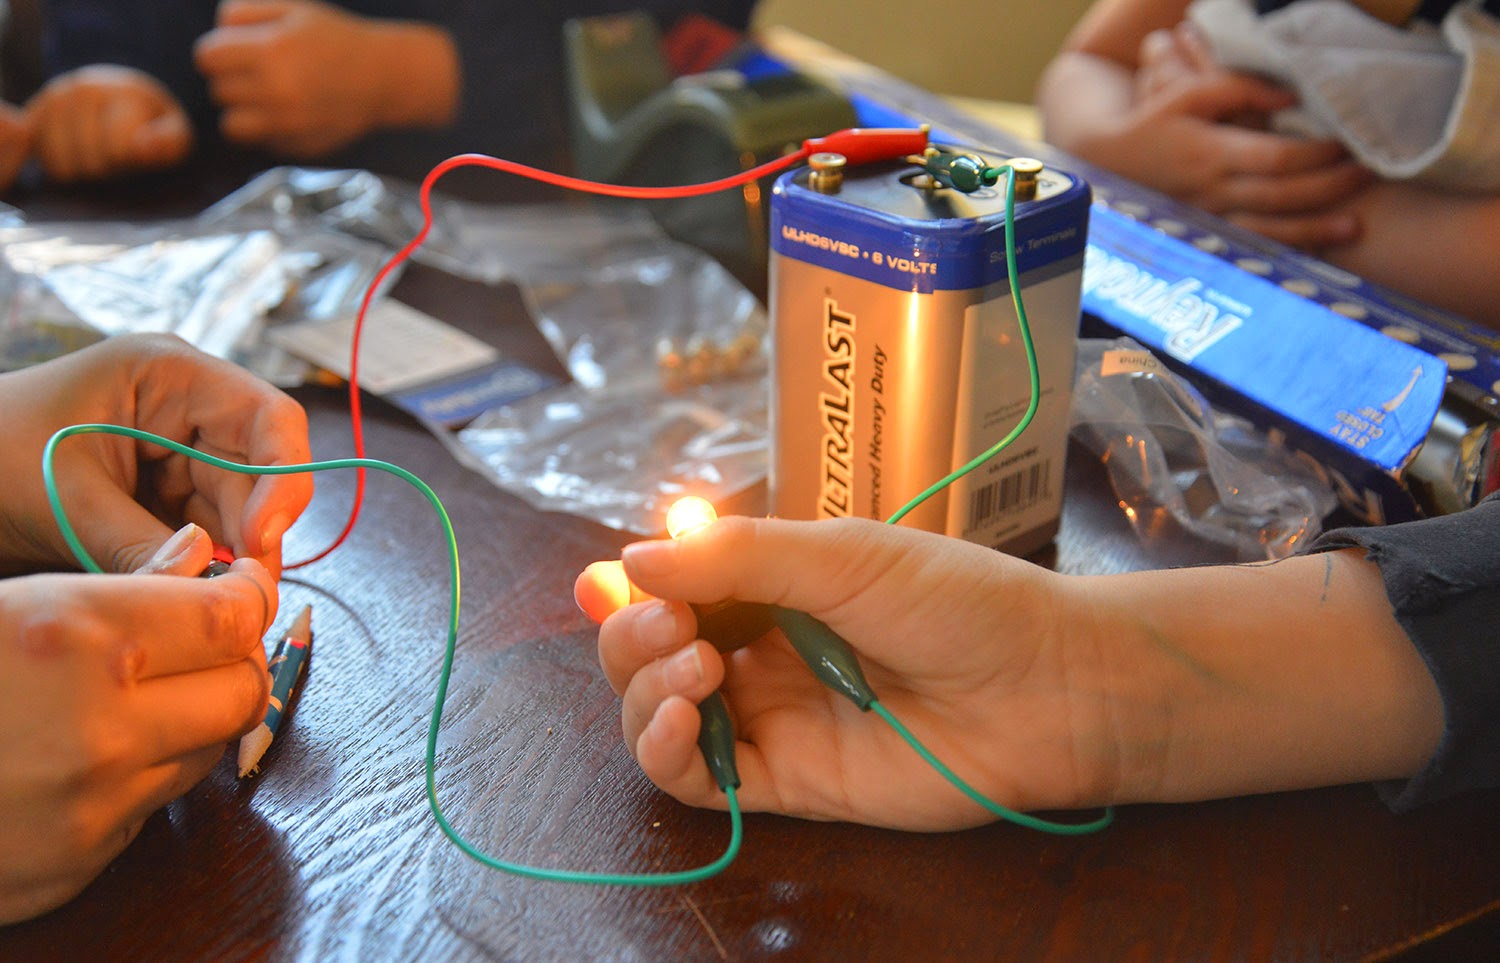 A school of fish: Simple Foil Circuits; Series and Parallel Circuits